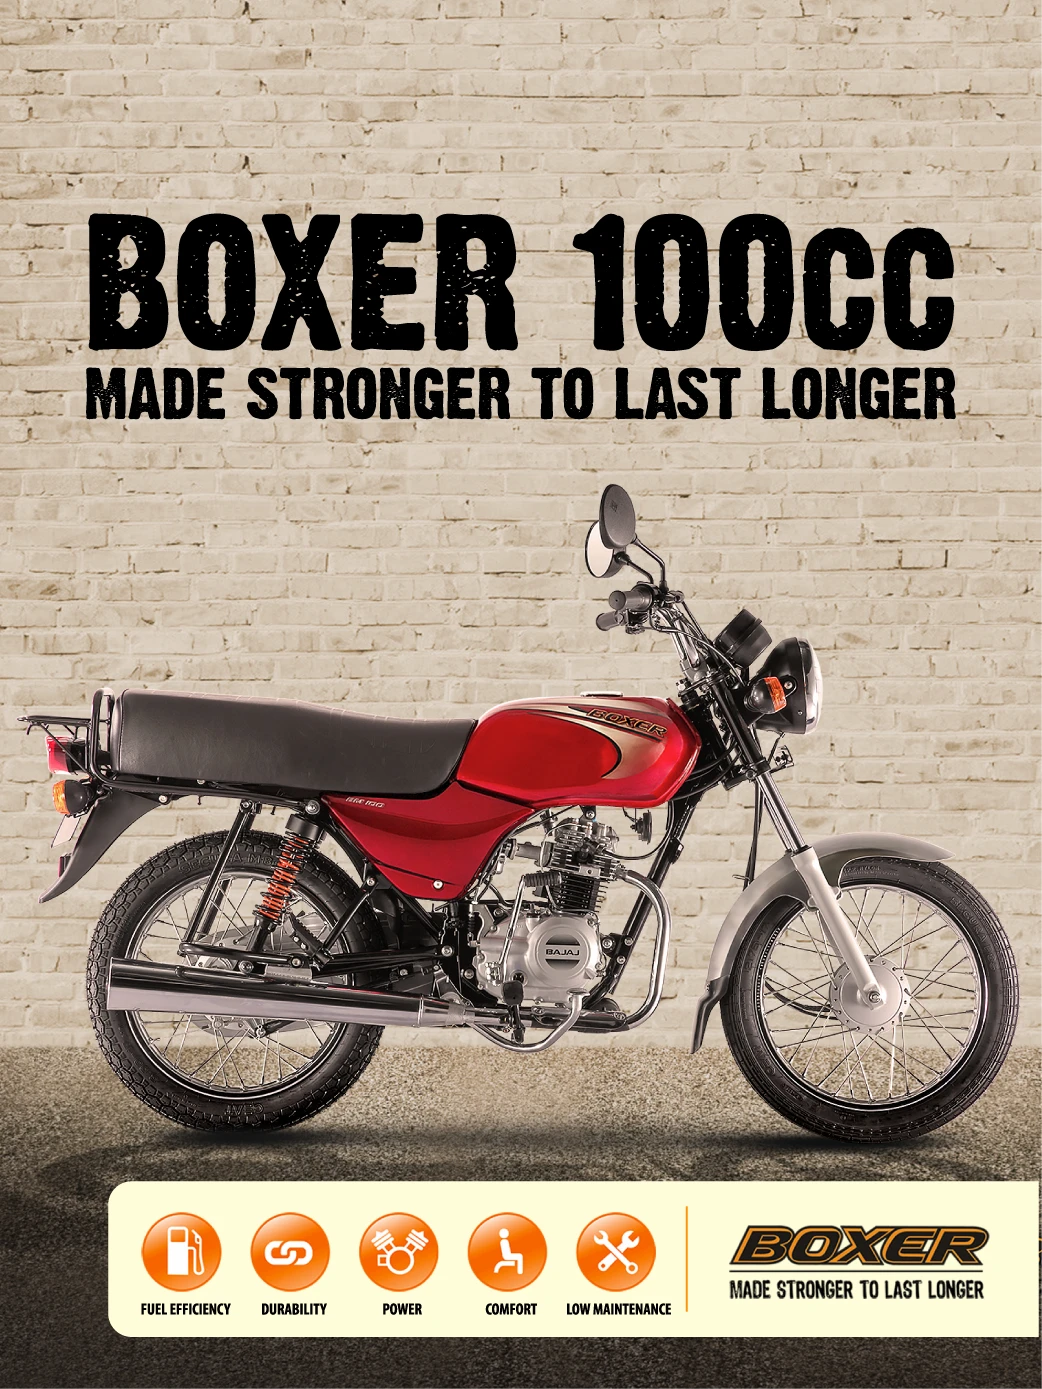 Boxer 1o0cc rest of africa ENG - Mobile 750x1000-01